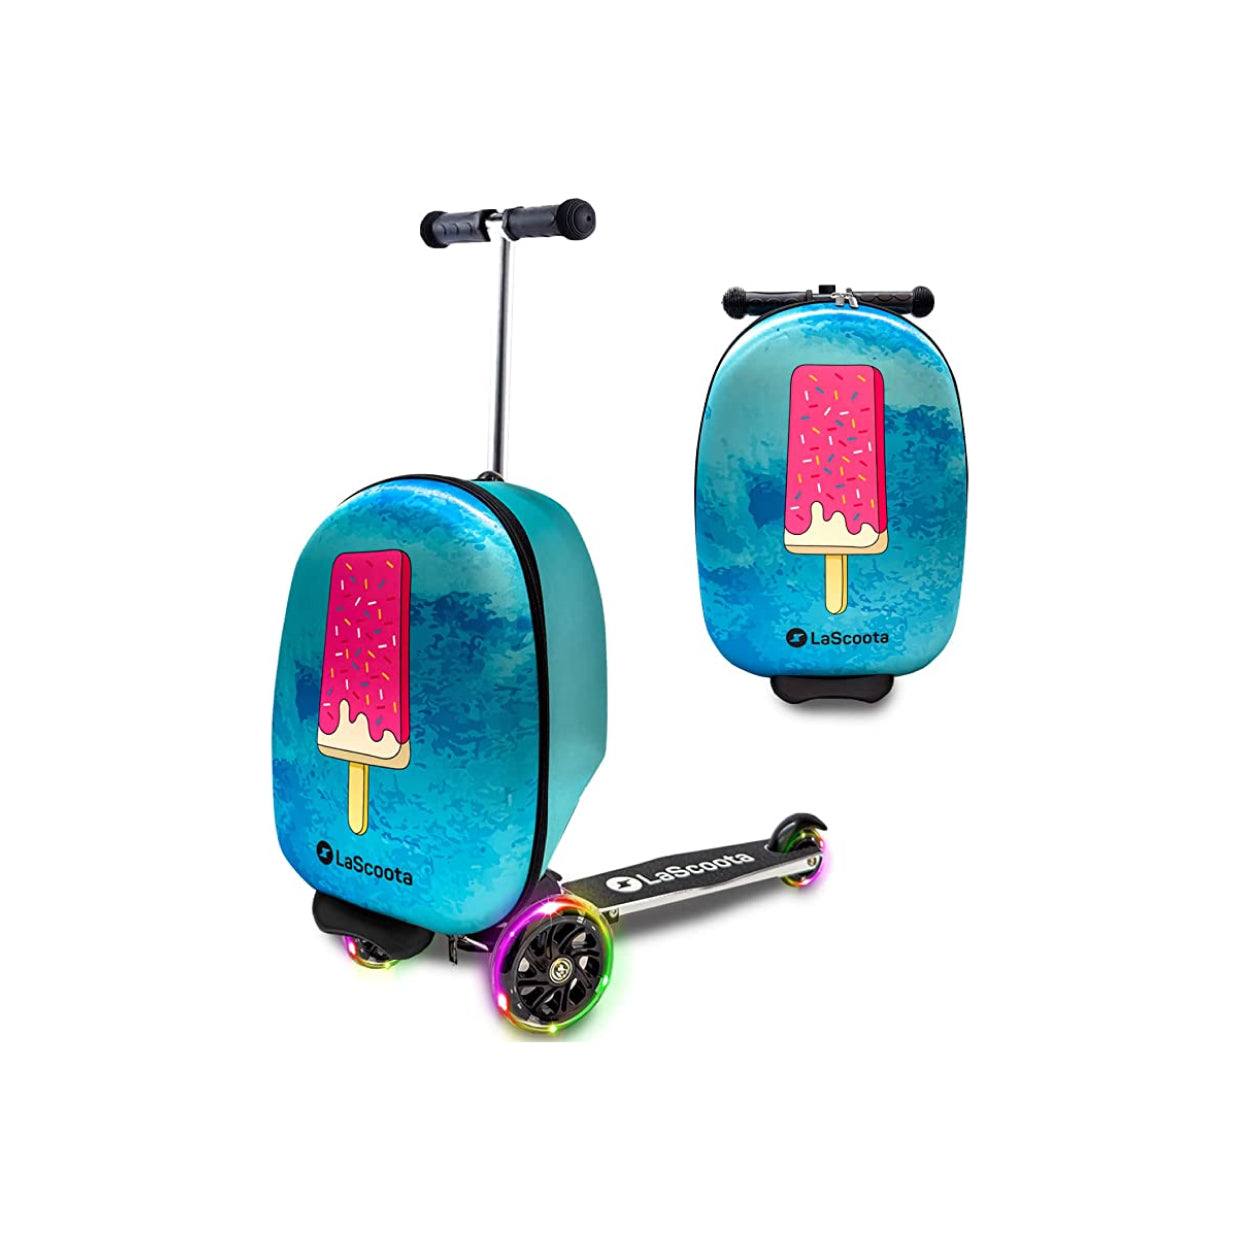 Ferrari Scooter With Removable Bag/Suitcase Luggage for Kids – KINGTOYS.us